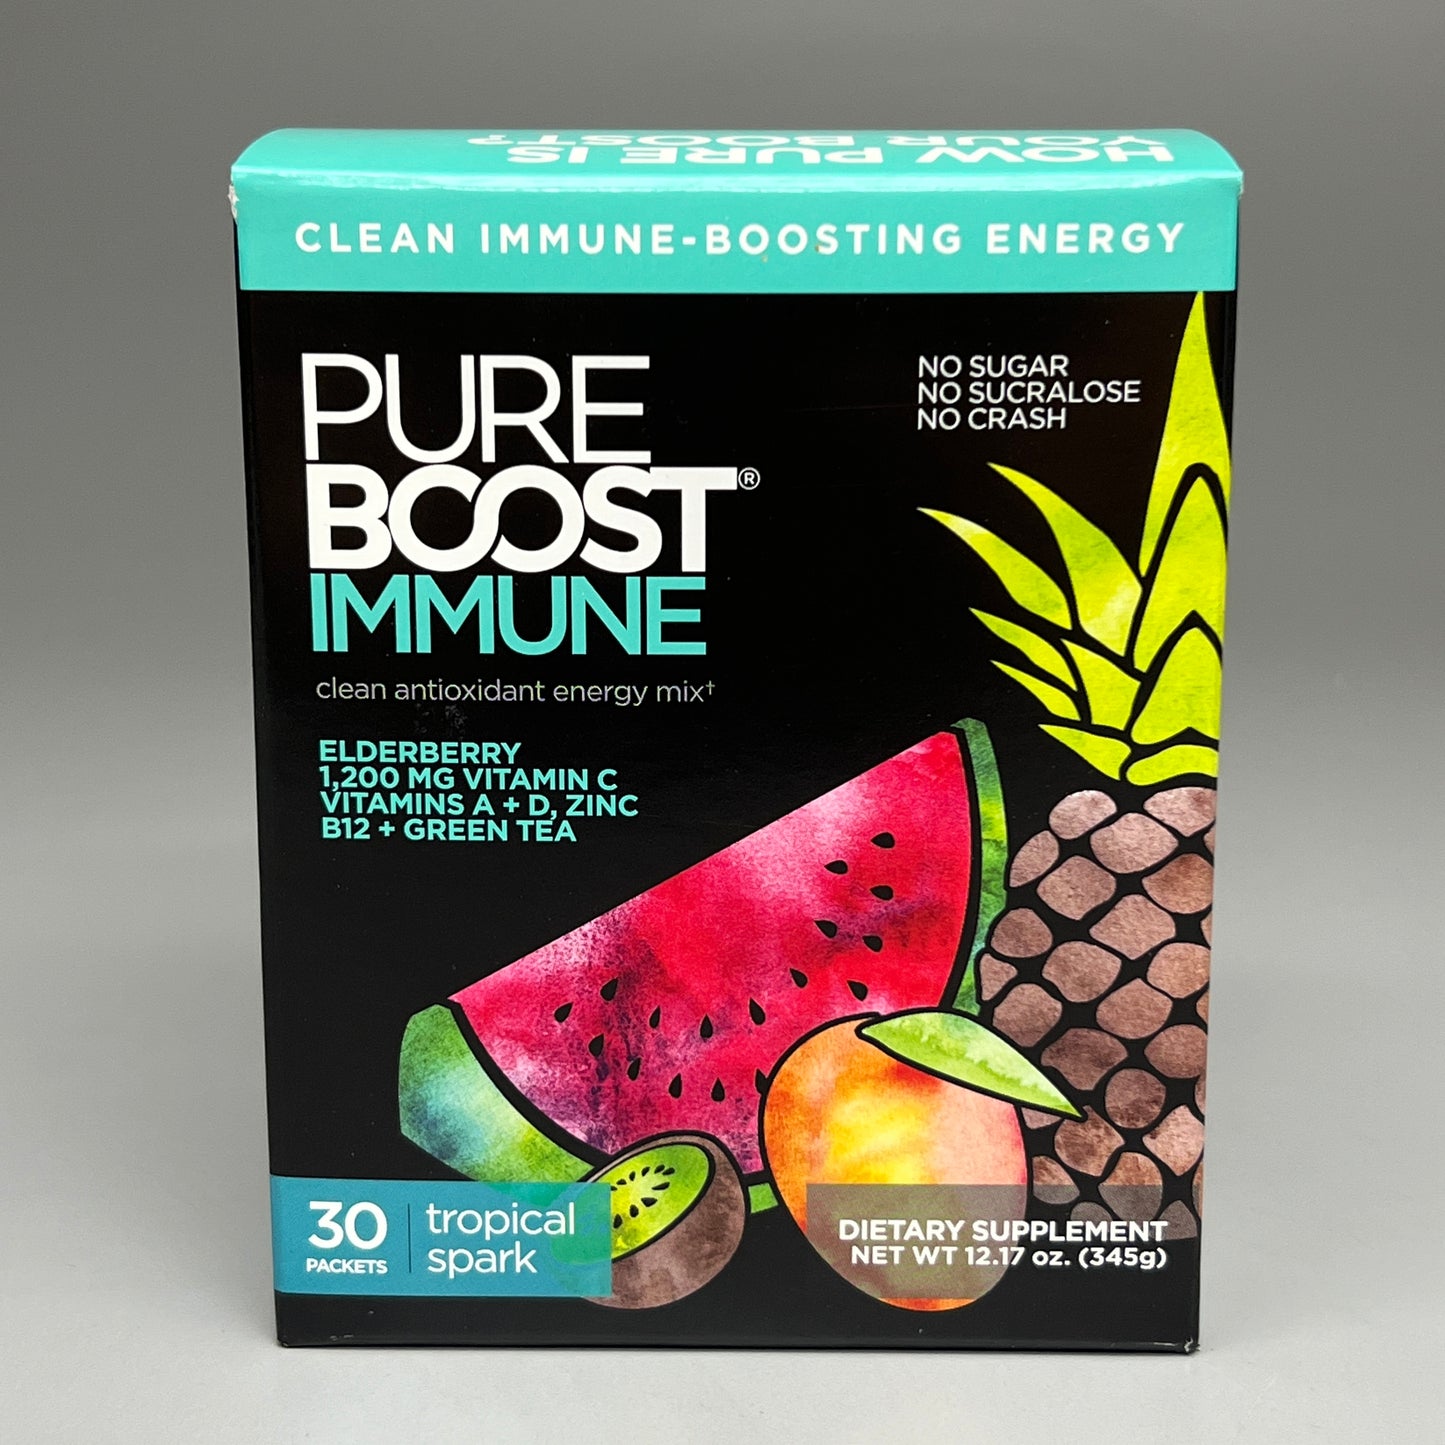 PUREBOOST IMMUNE Antioxidant Energy Mix 30 Packets Tropical Spark 06/24 (New)